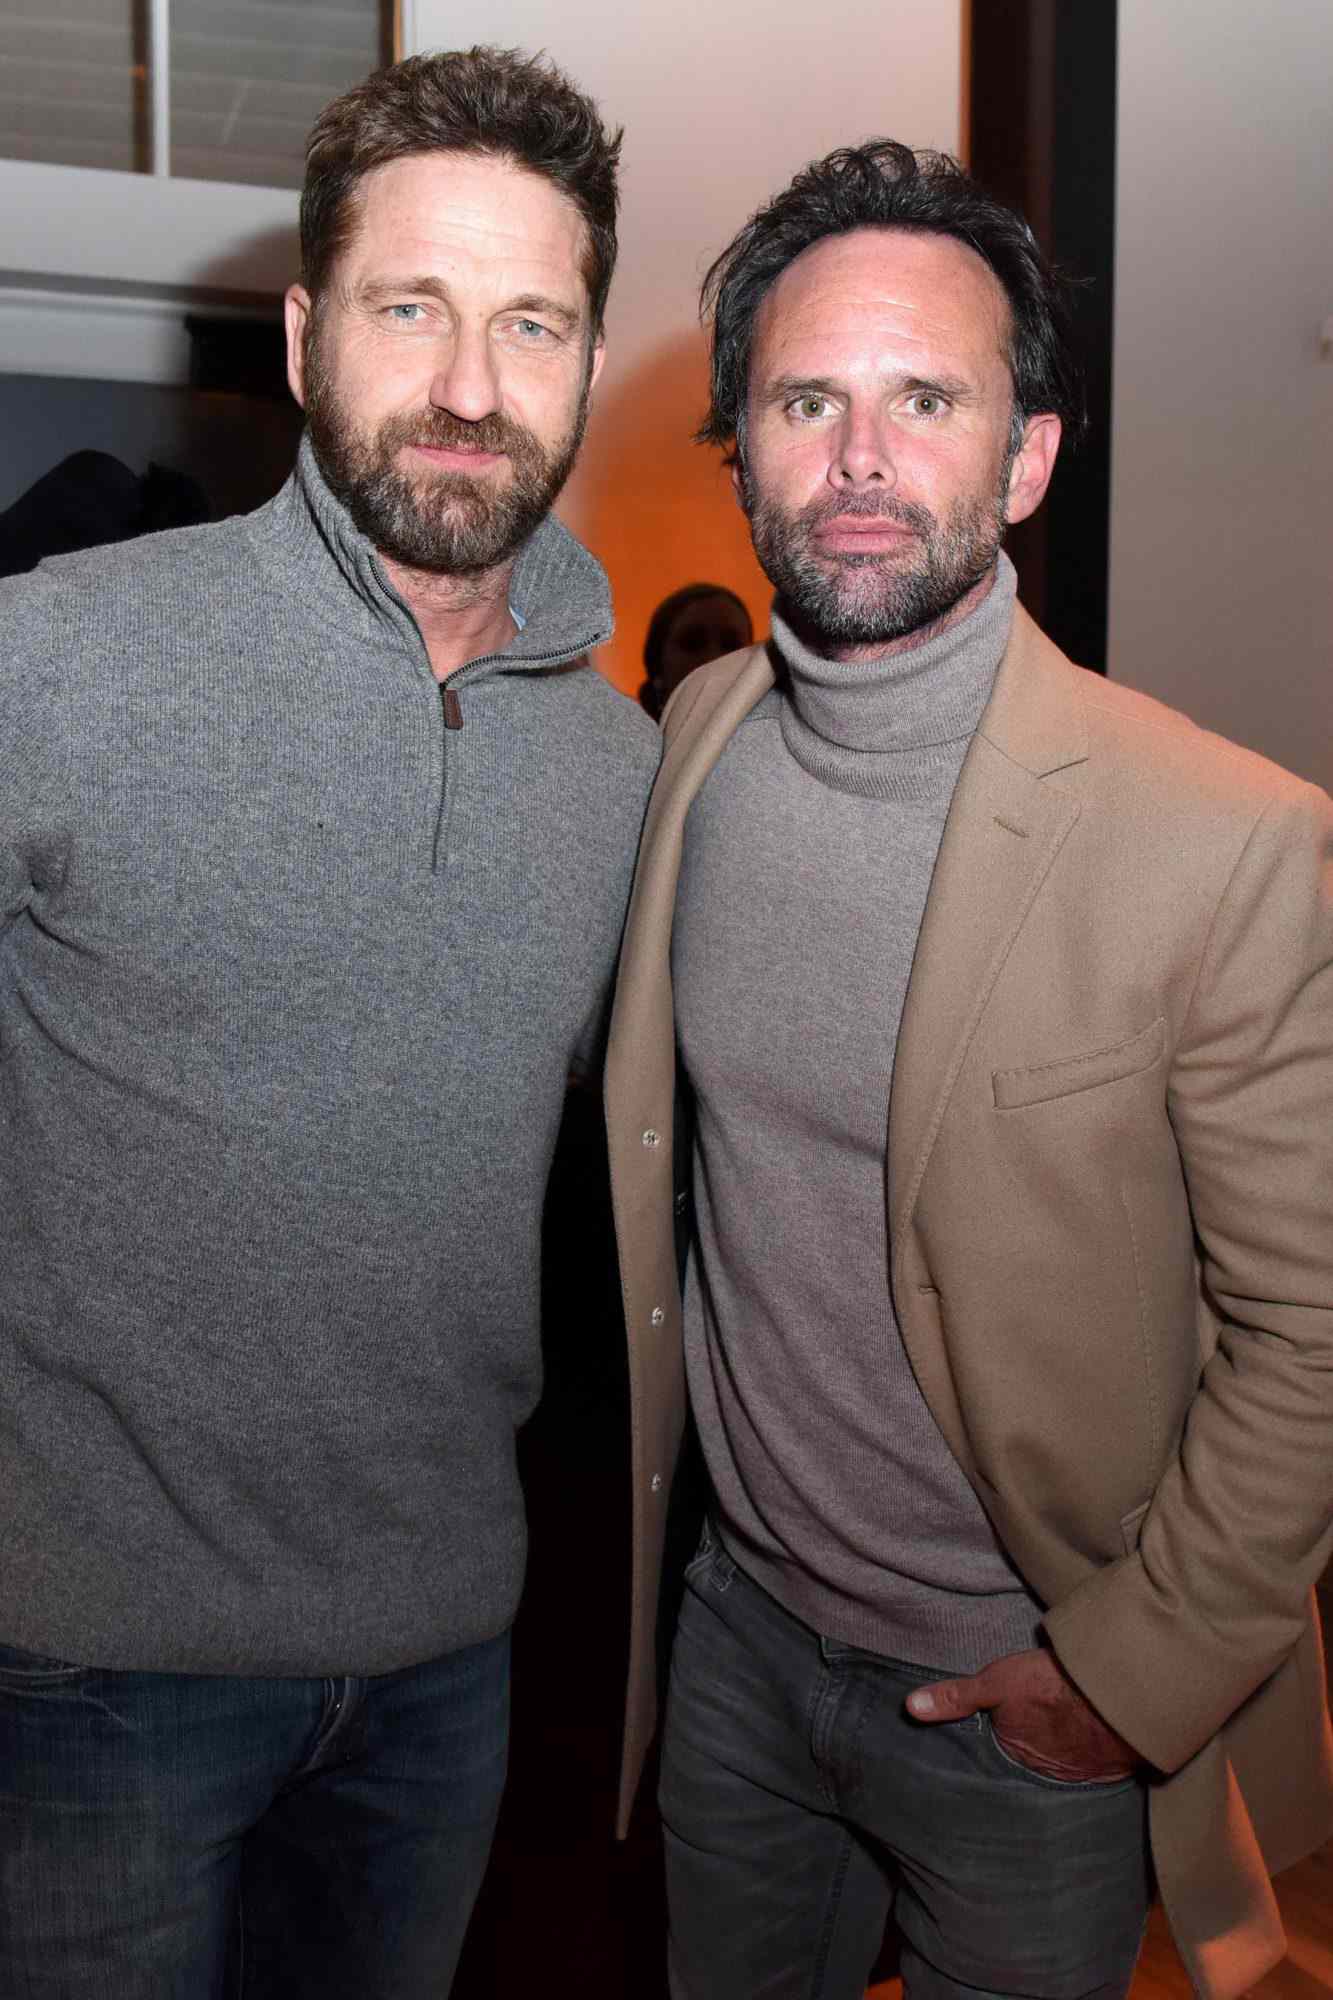 DIRECTV Lodge Presented By AT&T Hosted "Them That Follow" Party At Sundance Film Festival 2019